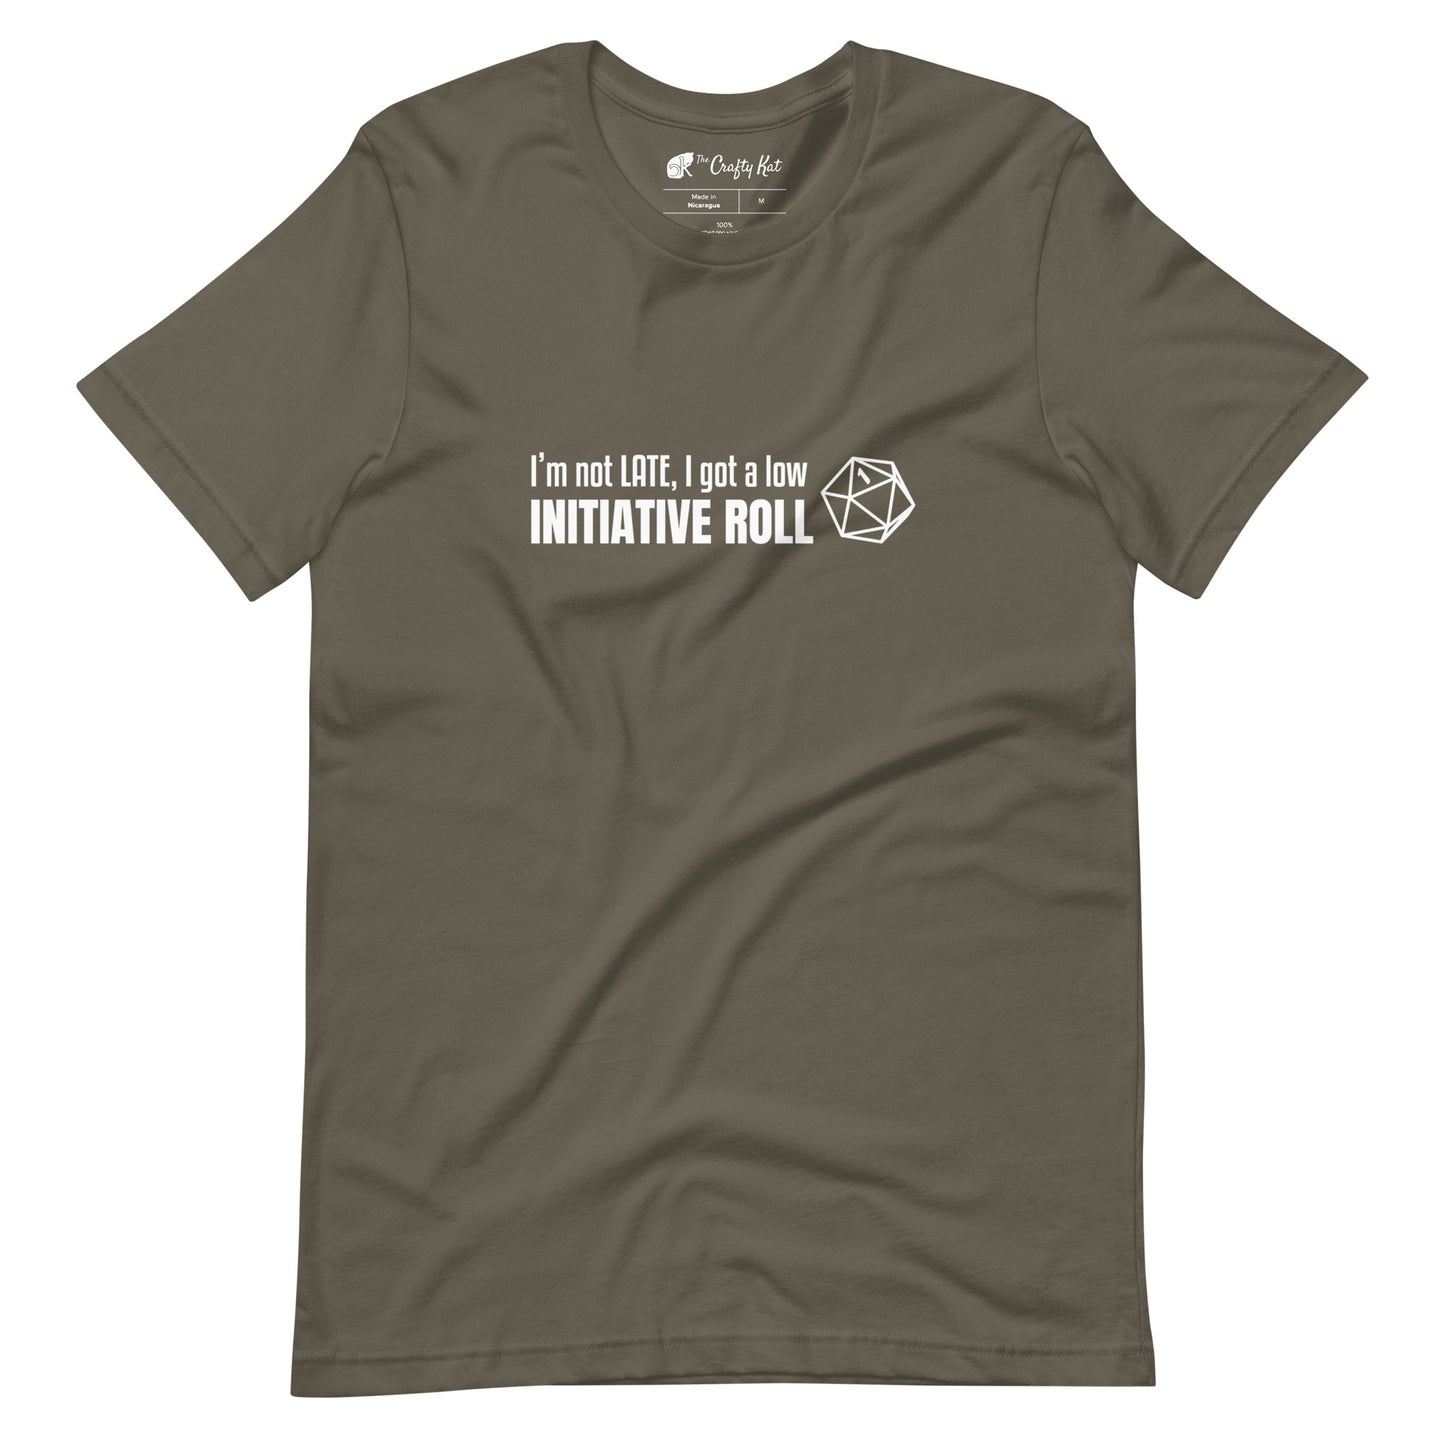 Army (olive) unisex t-shirt with a graphic of a d20 (twenty-sided die) showing a roll of "1" and text: "I'm not LATE, I got a low INITIATIVE ROLL"